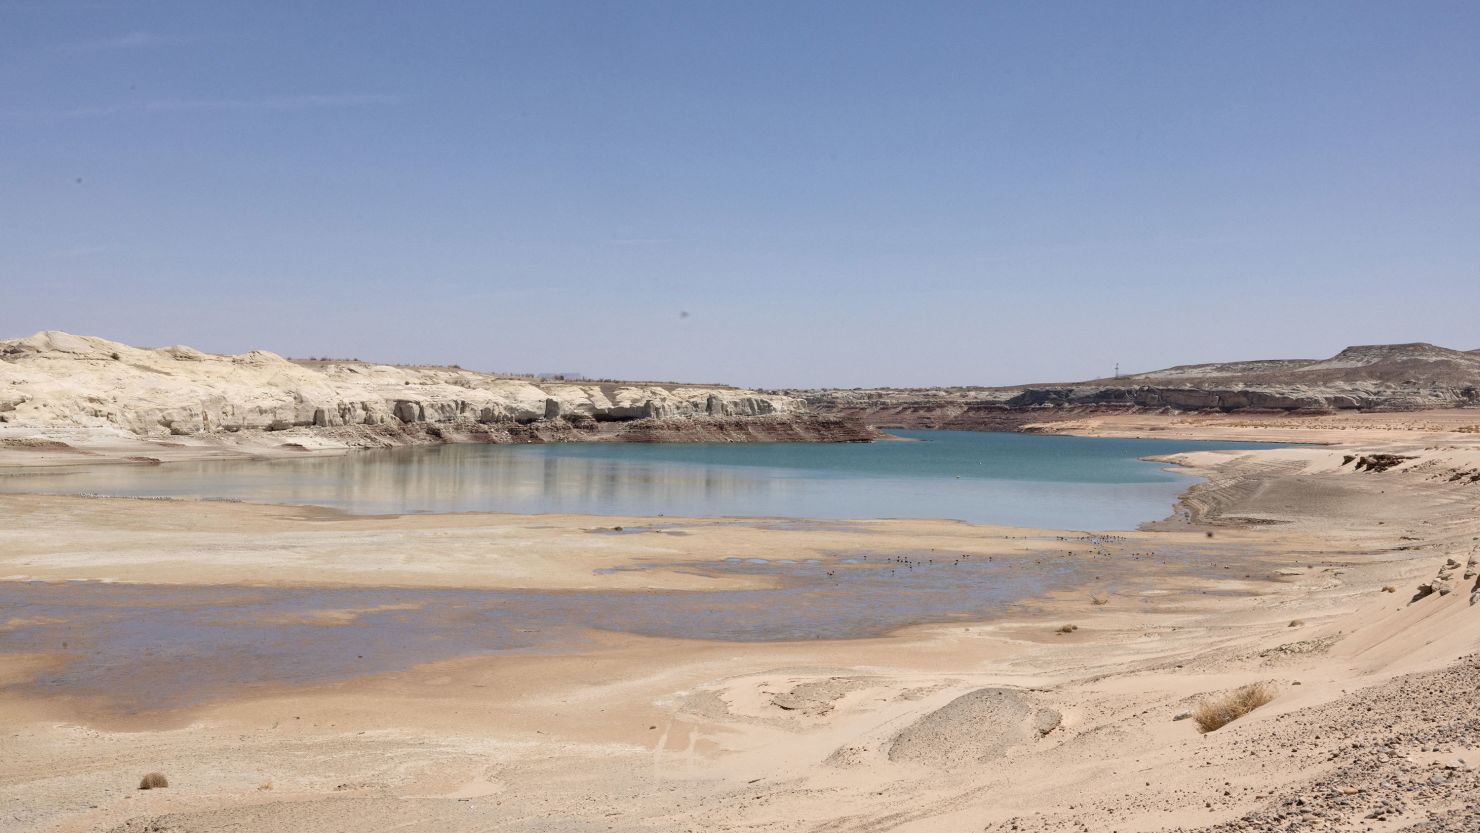 At Lake Powell, water recedes near Lone Rock Beach, a popular recreational area that used to be underwater, on April 20.